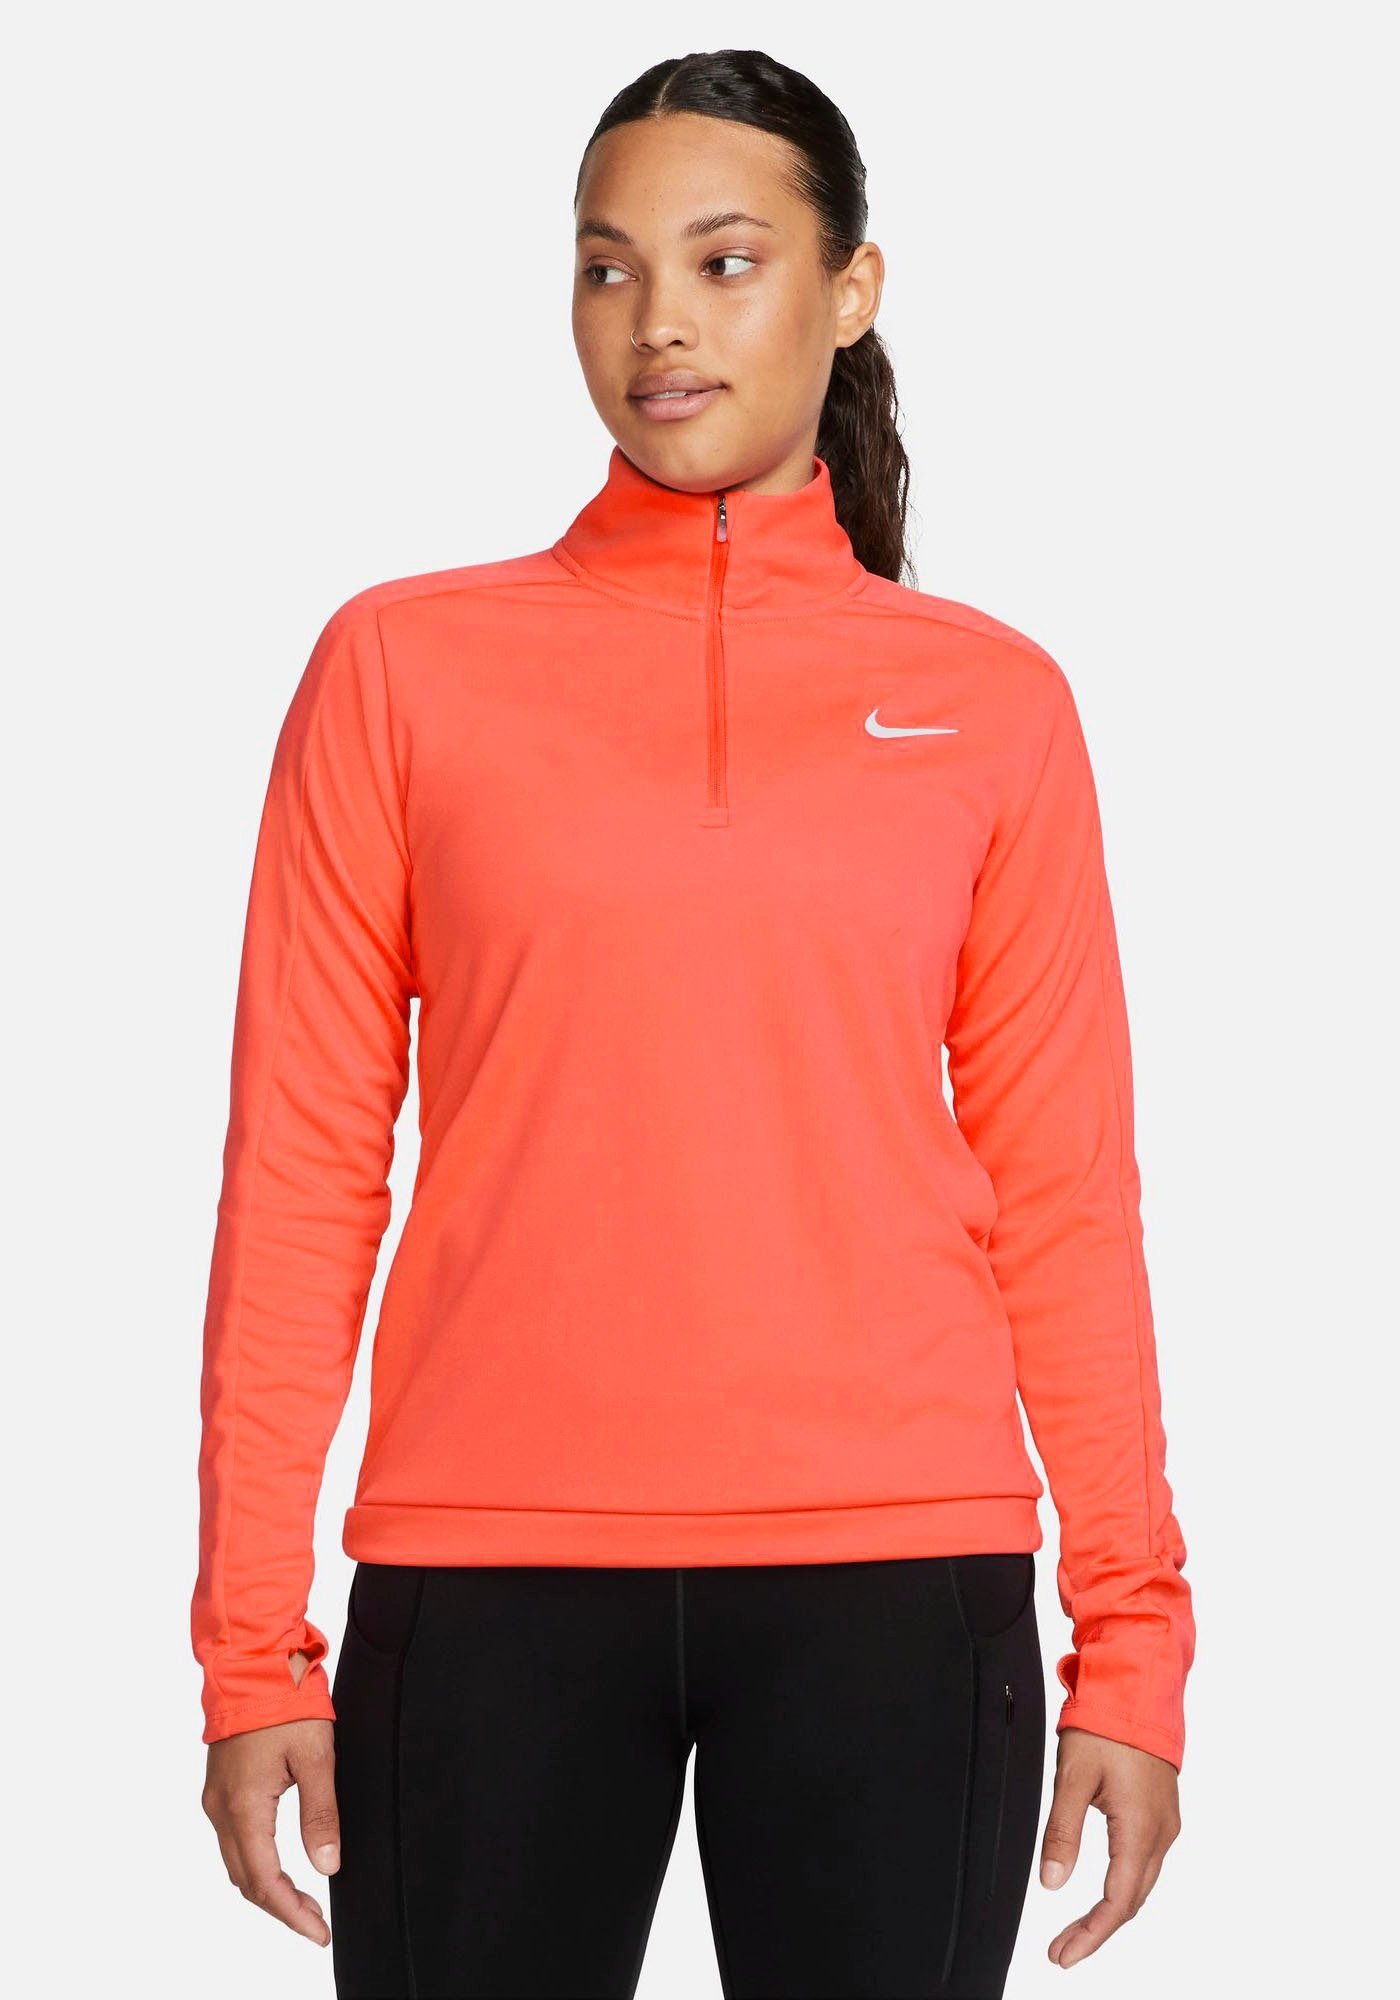 Nike Laufshirt DRI-FIT PACER WOMEN'S 1/-ZIP PULLOVER EMBER GLOW/REFLECTIVE SILV